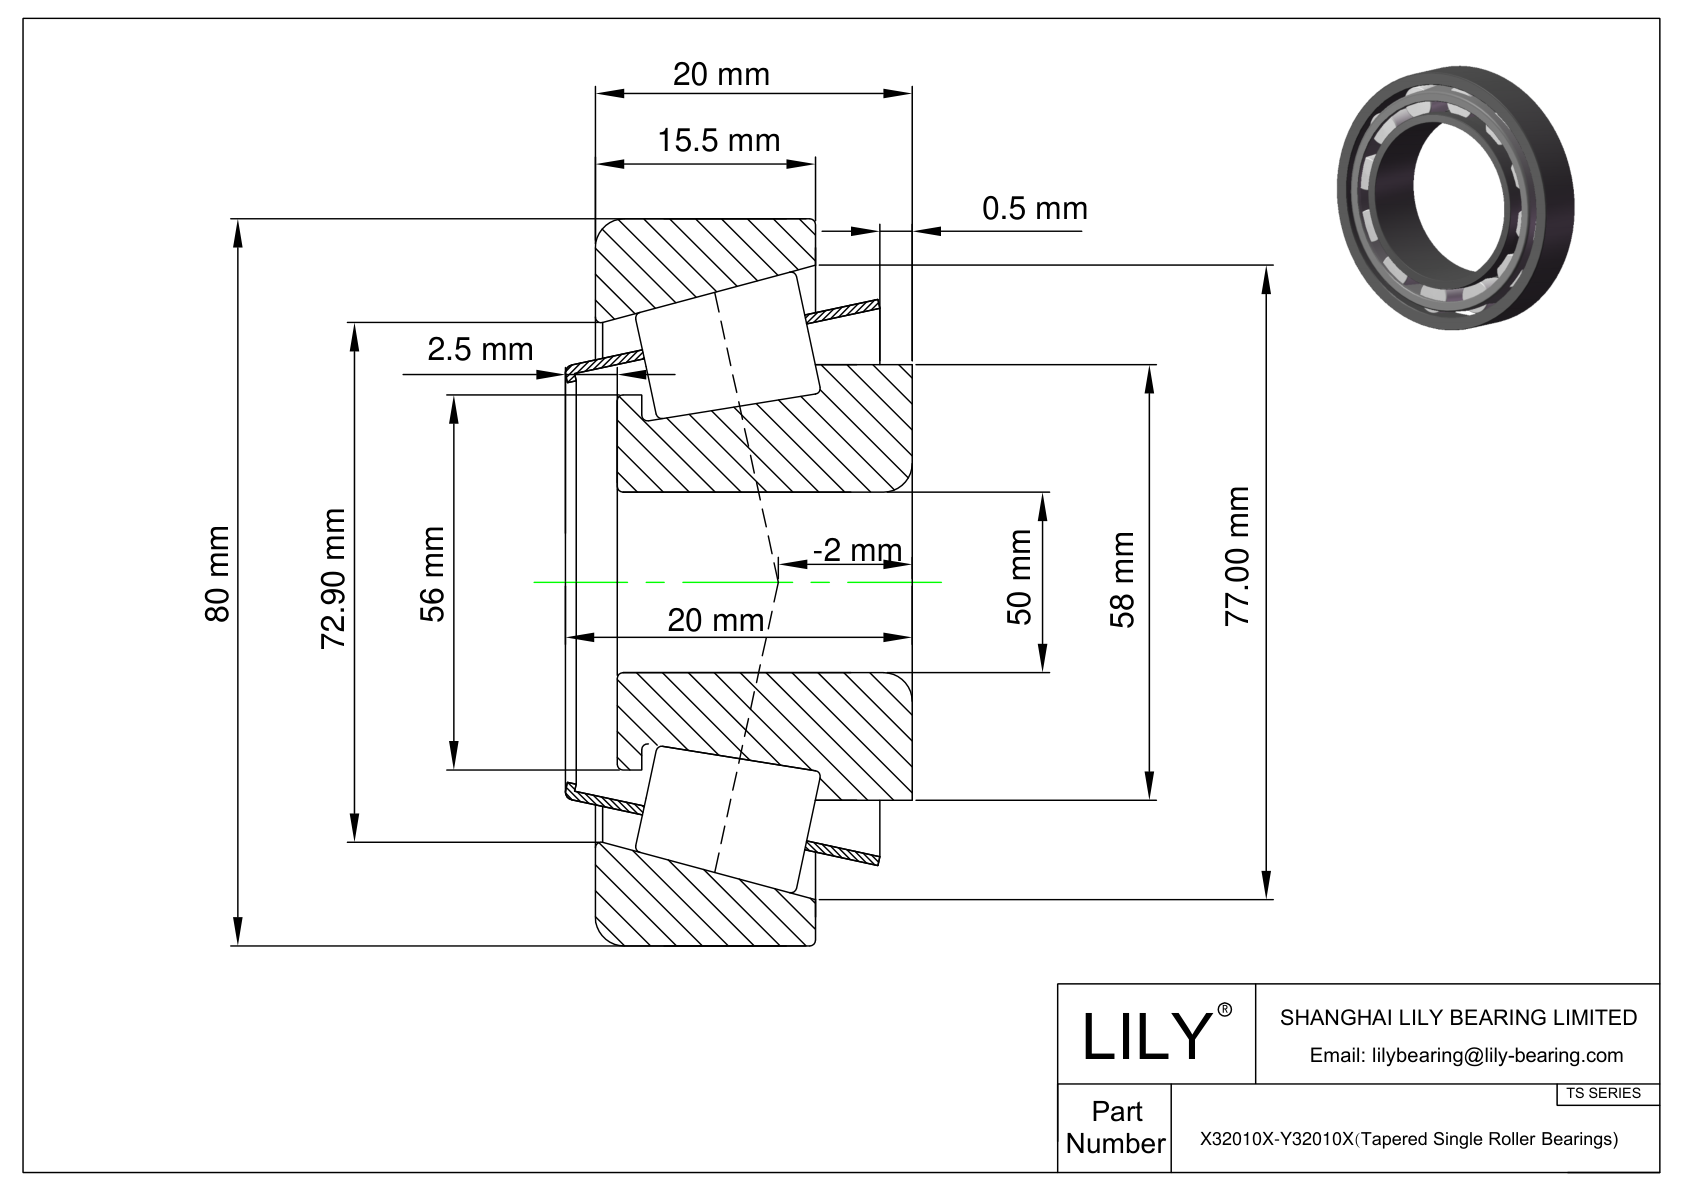 X32010X-Y32010X TS (Tapered Single Roller Bearings) (Metric) cad drawing